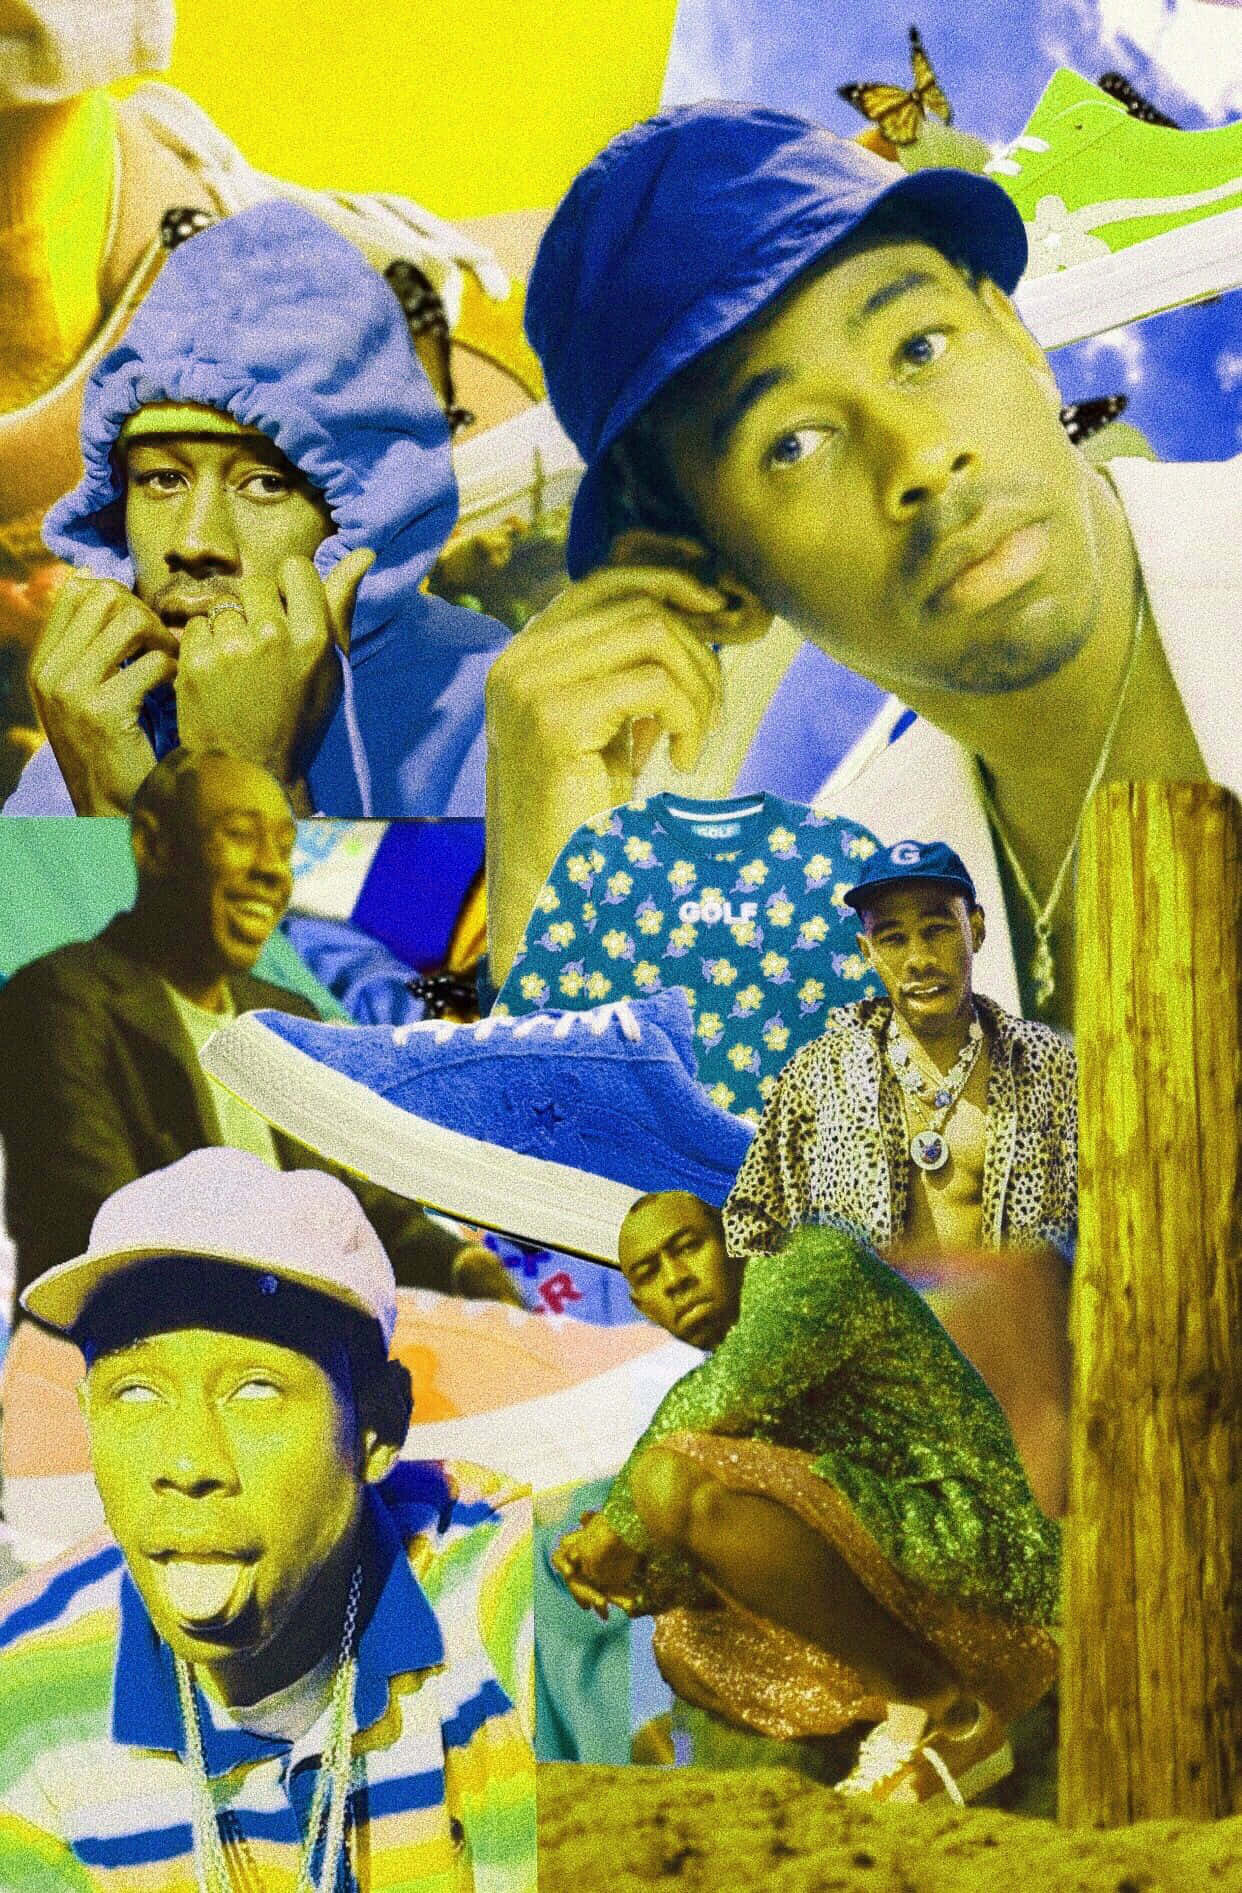 Tyler The Creator always knew how to make an impact